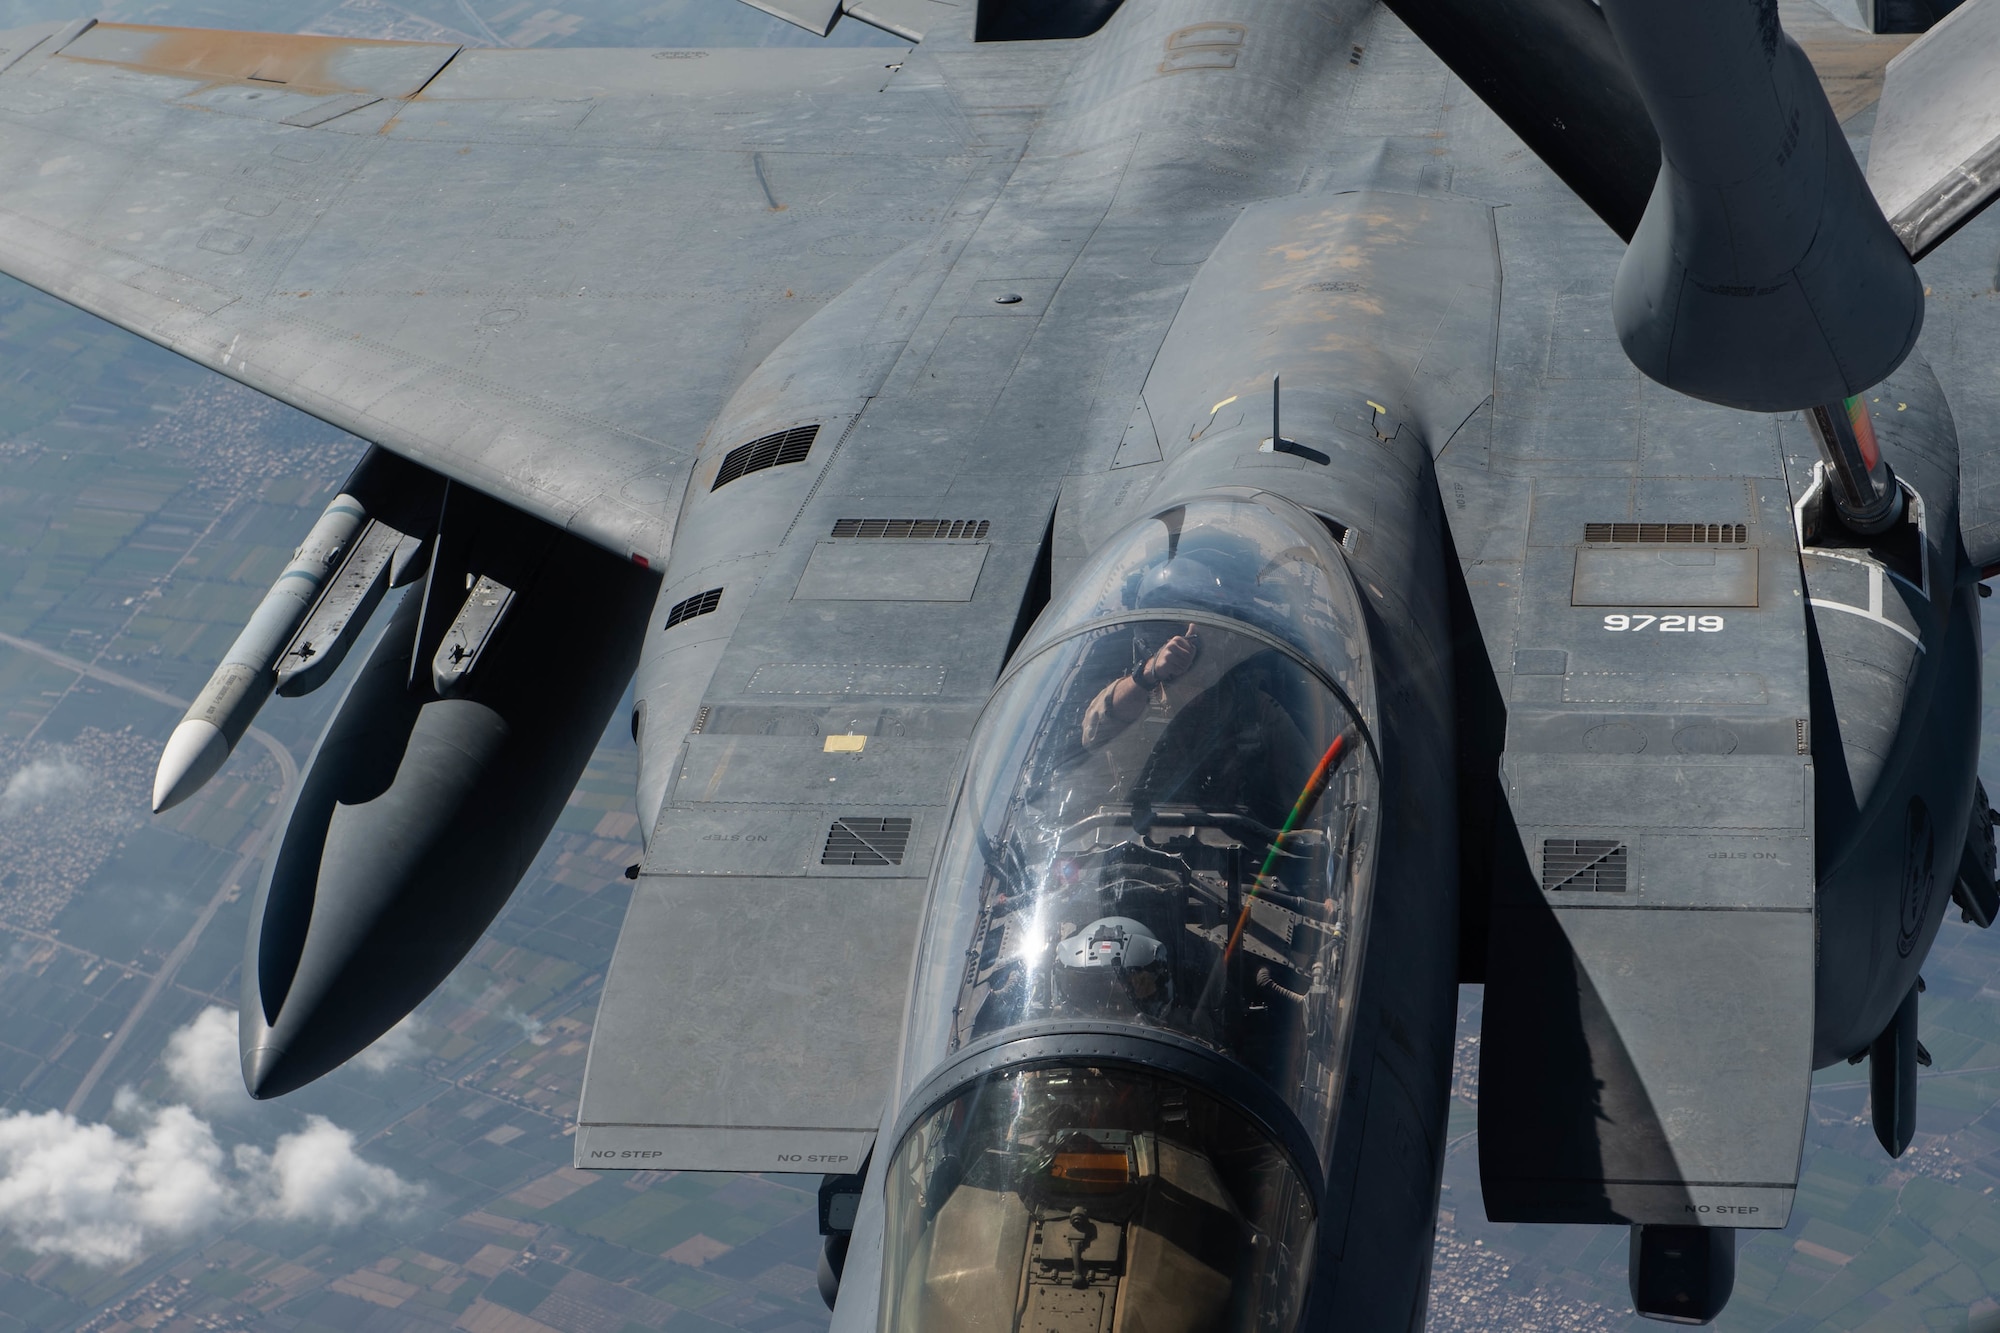 A U.S. Air Force F-15E Strike Eagle assigned to the 494th Expeditionary Fighter Squadron receives fuel from a KC-135 Stratotanker assigned to the 93rd Expeditionary Air Refueling Squadron in support of Bright Star 21